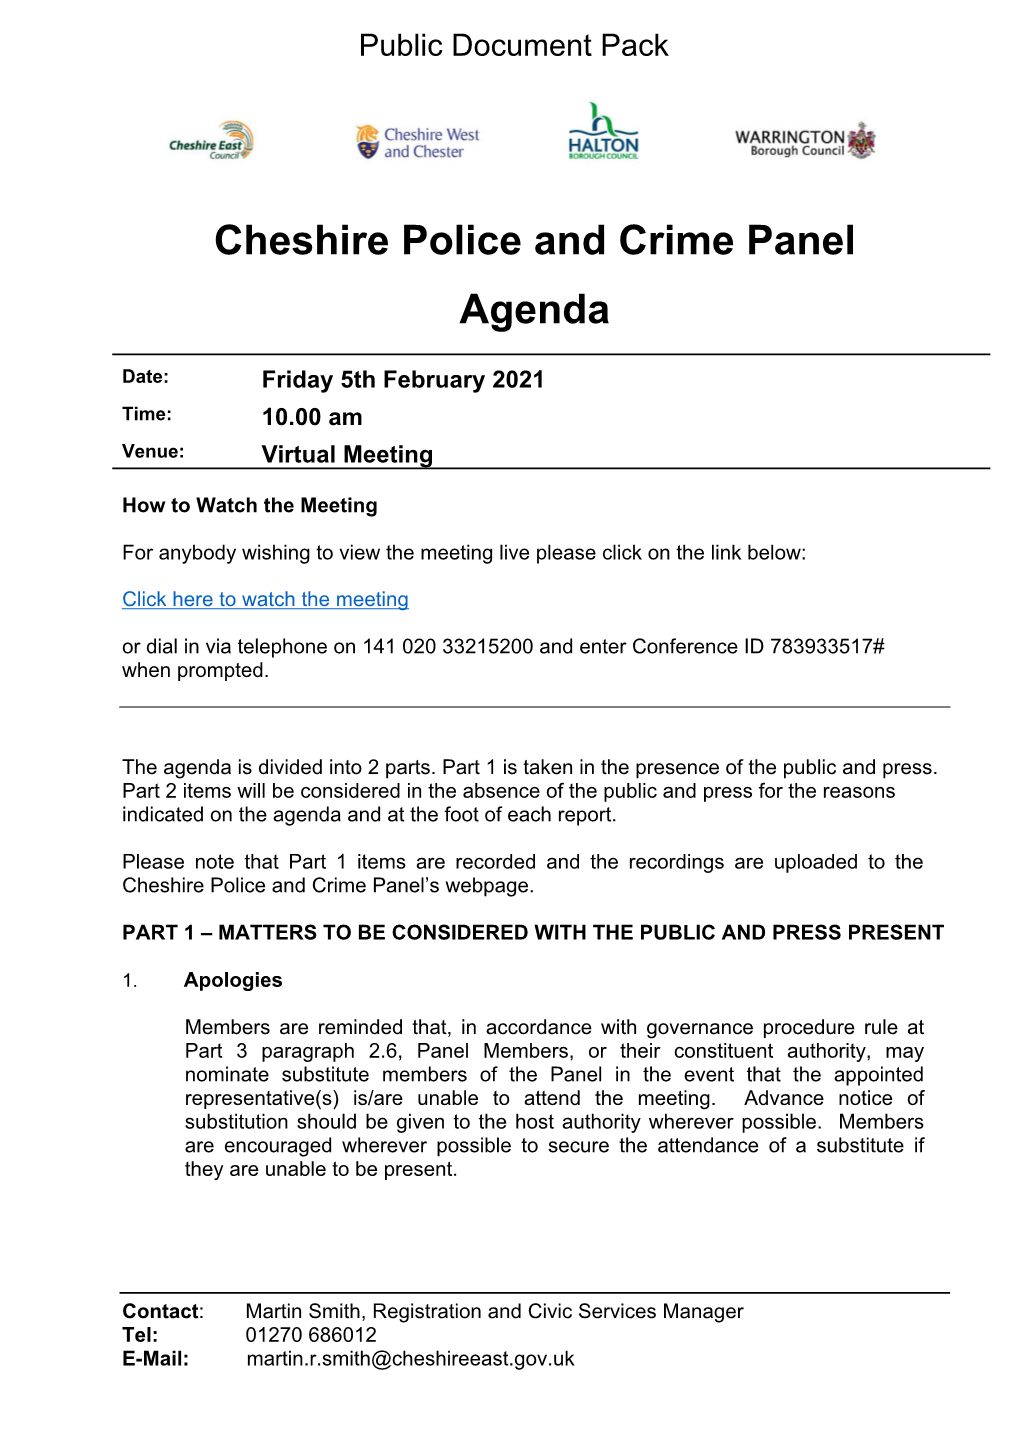 (Public Pack)Agenda Document for Cheshire Police and Crime Panel